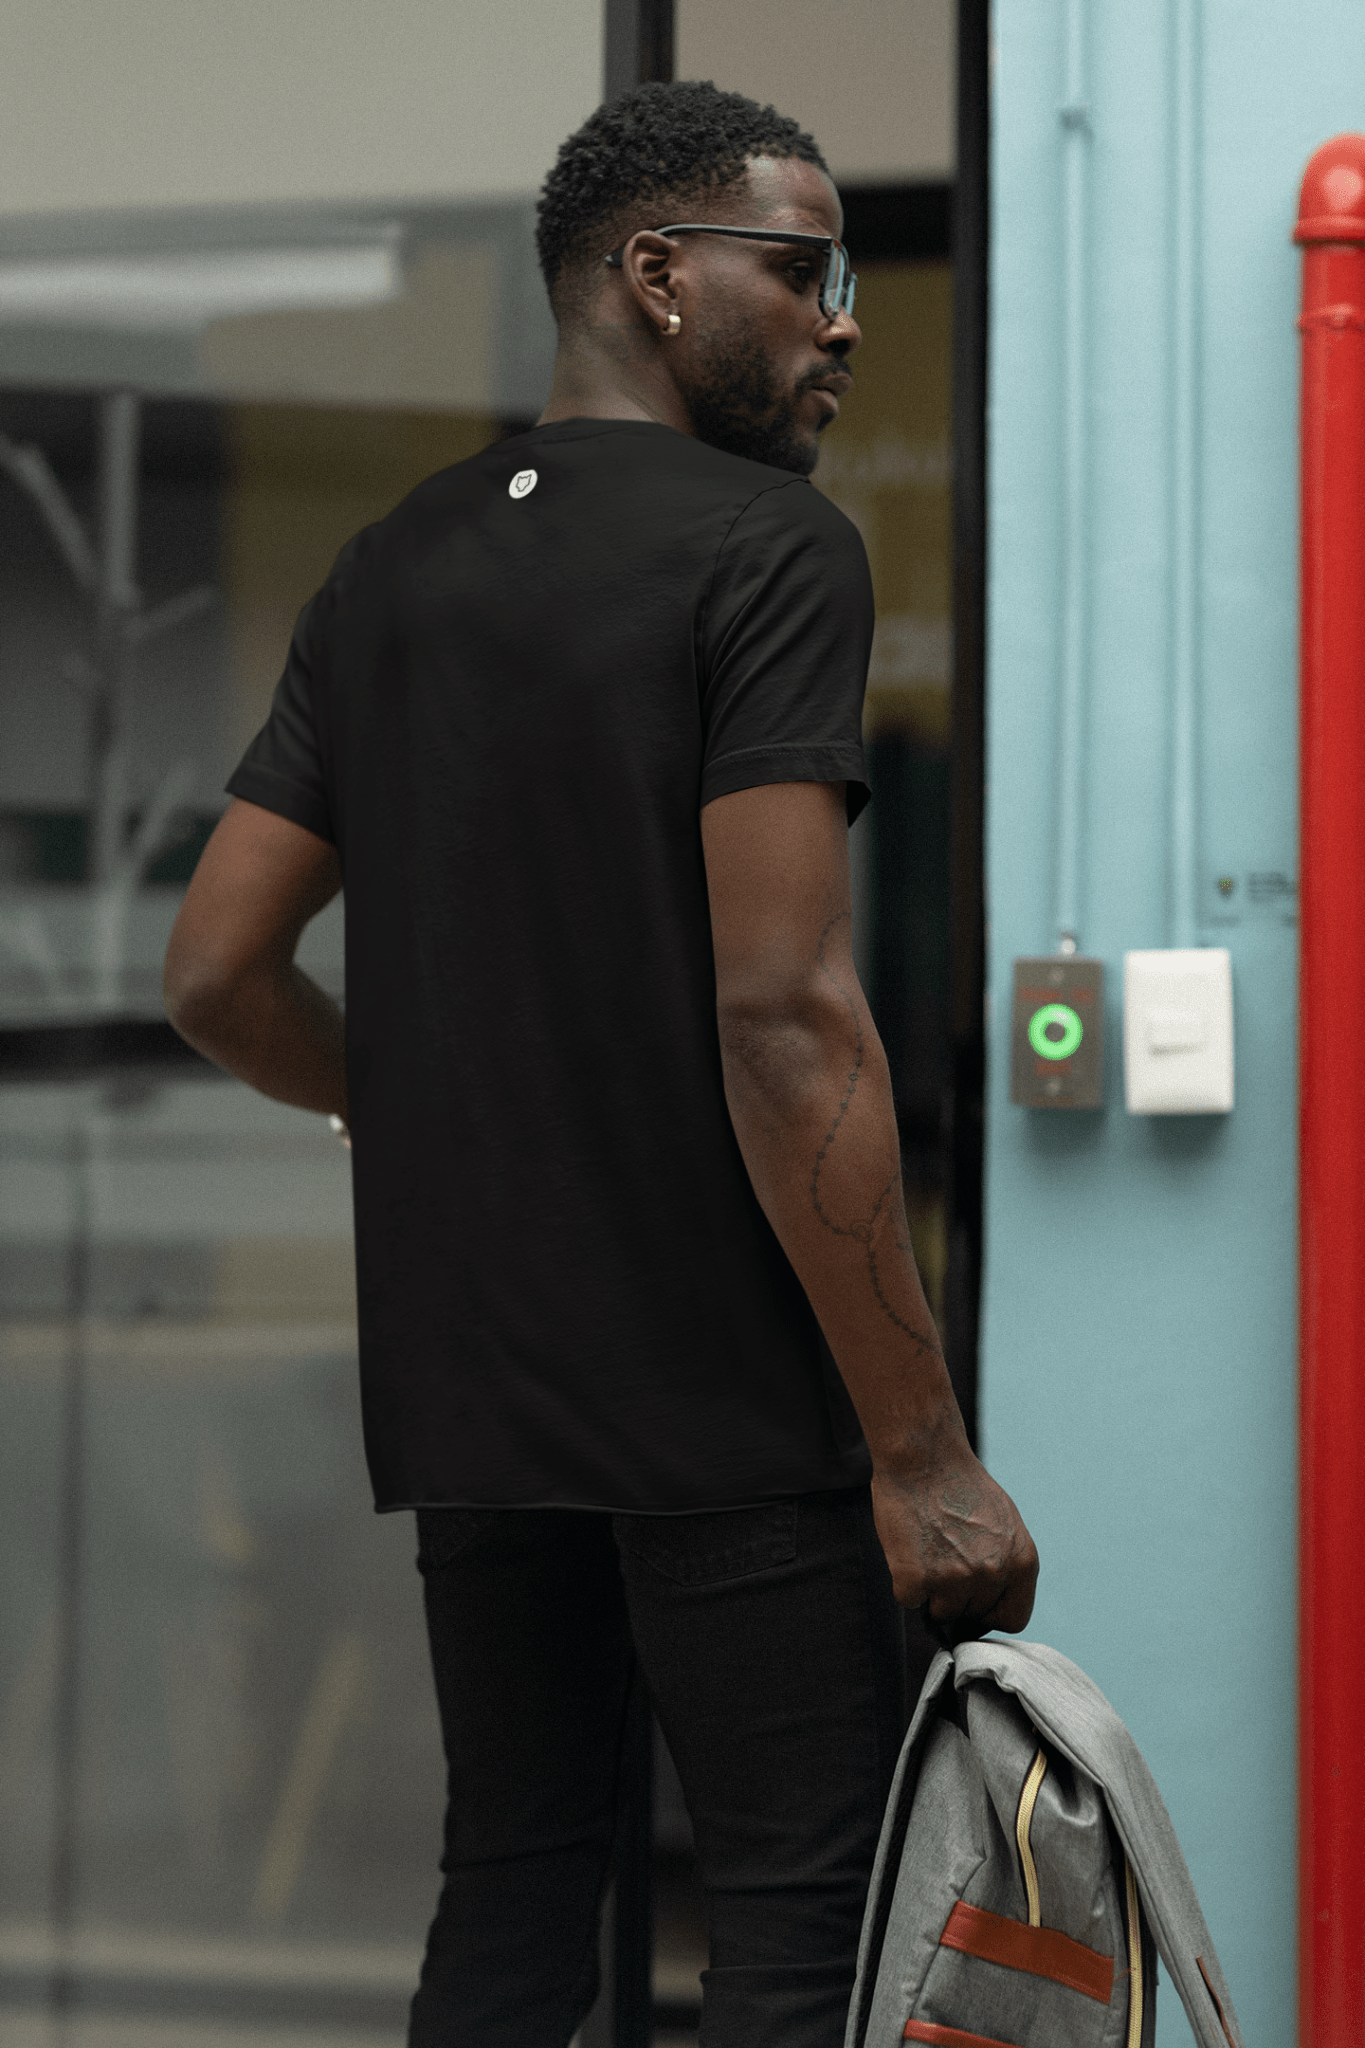 Black Casual T-shirt by Forge Athletica worn by a black man posing his back. The man is carrying a cool bag and wearing a pair of sunglasses and black jeans.